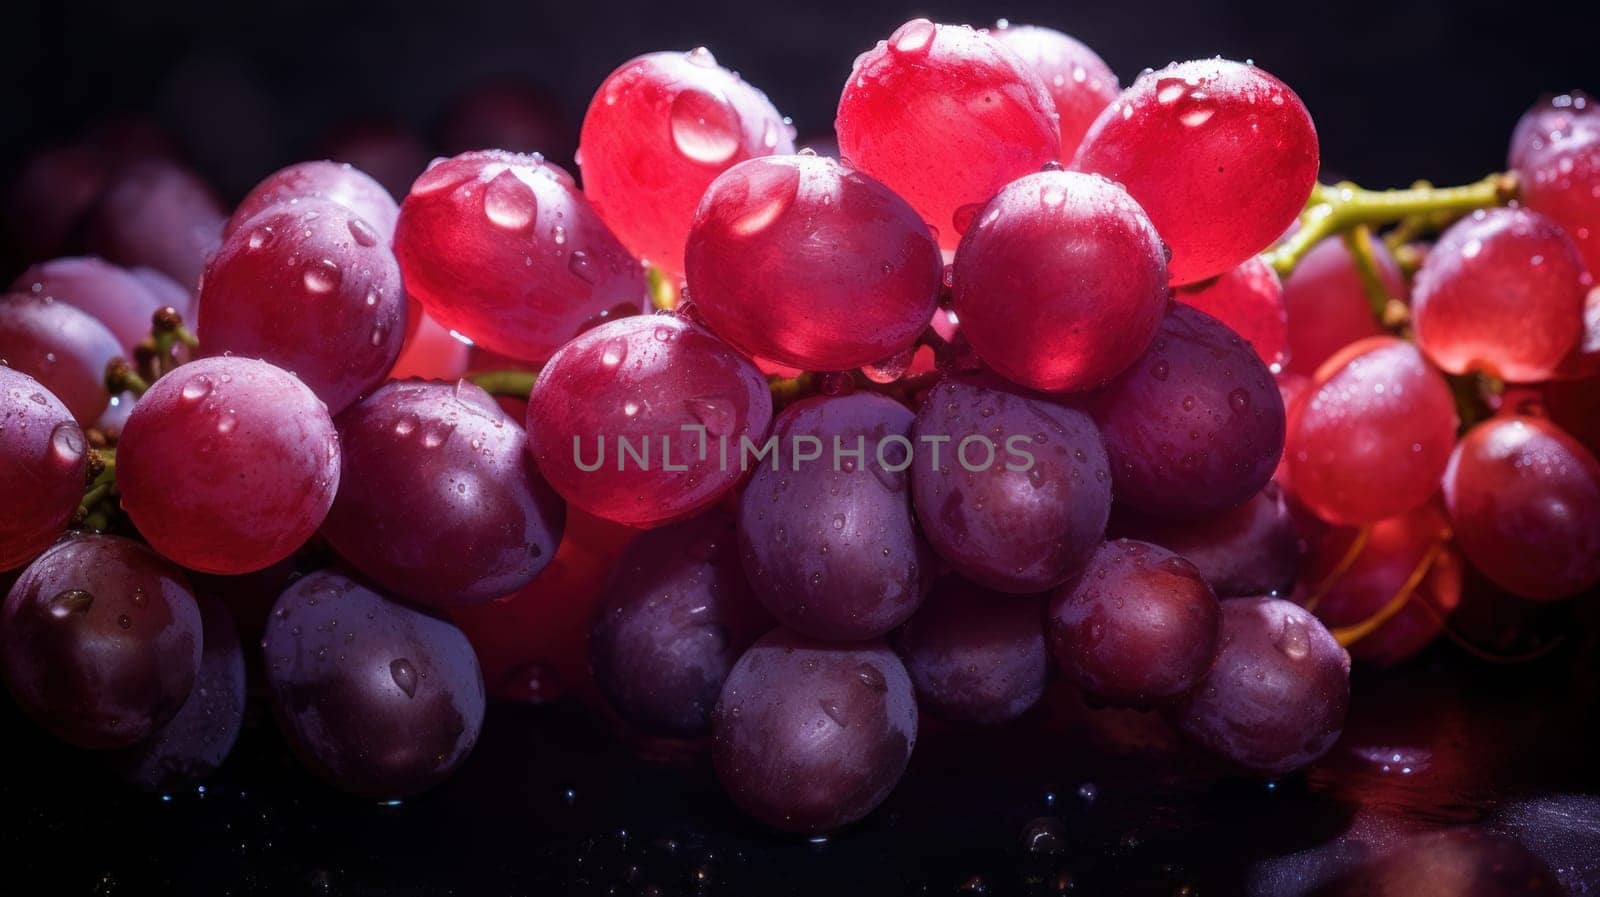 Red, pink grapes with water drops, close-up background. by Alla_Yurtayeva